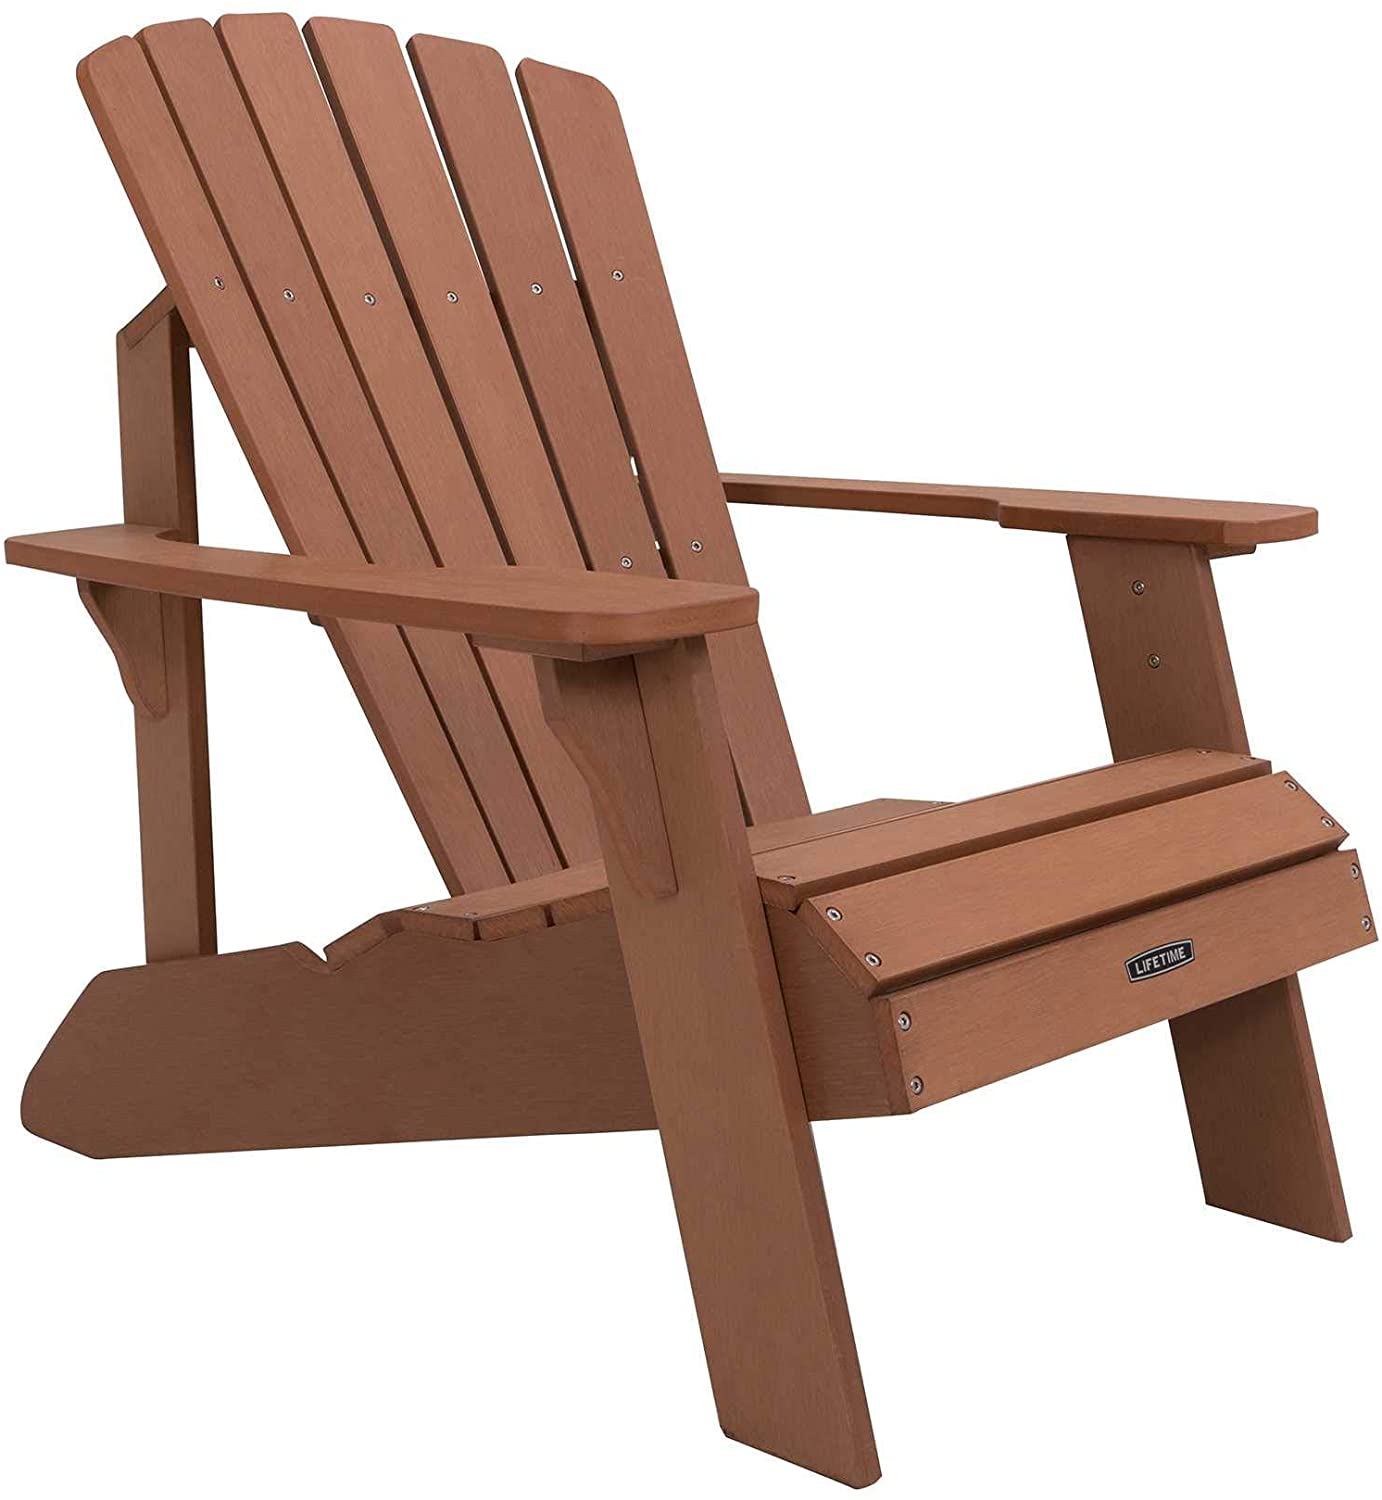 Review of Lifetime Faux Wood Adirondack Chair, Brown - 60064